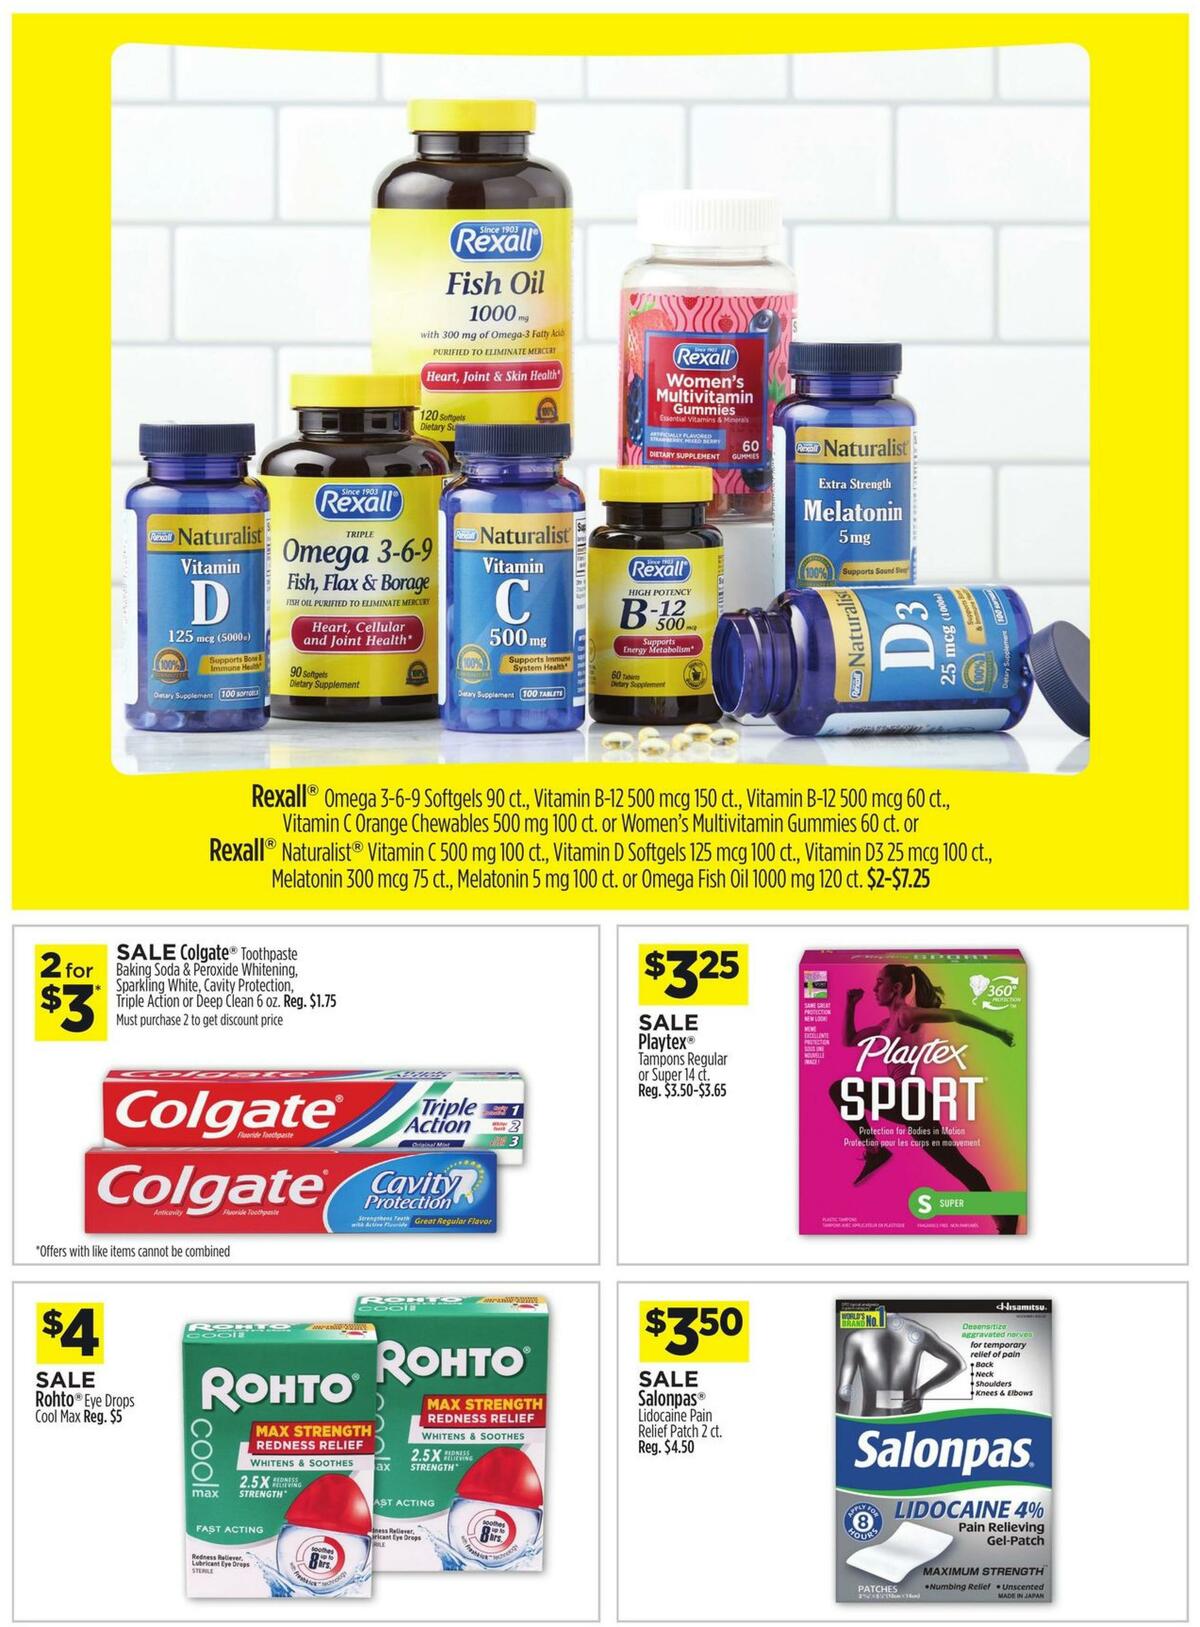 Dollar General Health & Beauty Savings Weekly Ad from August 16